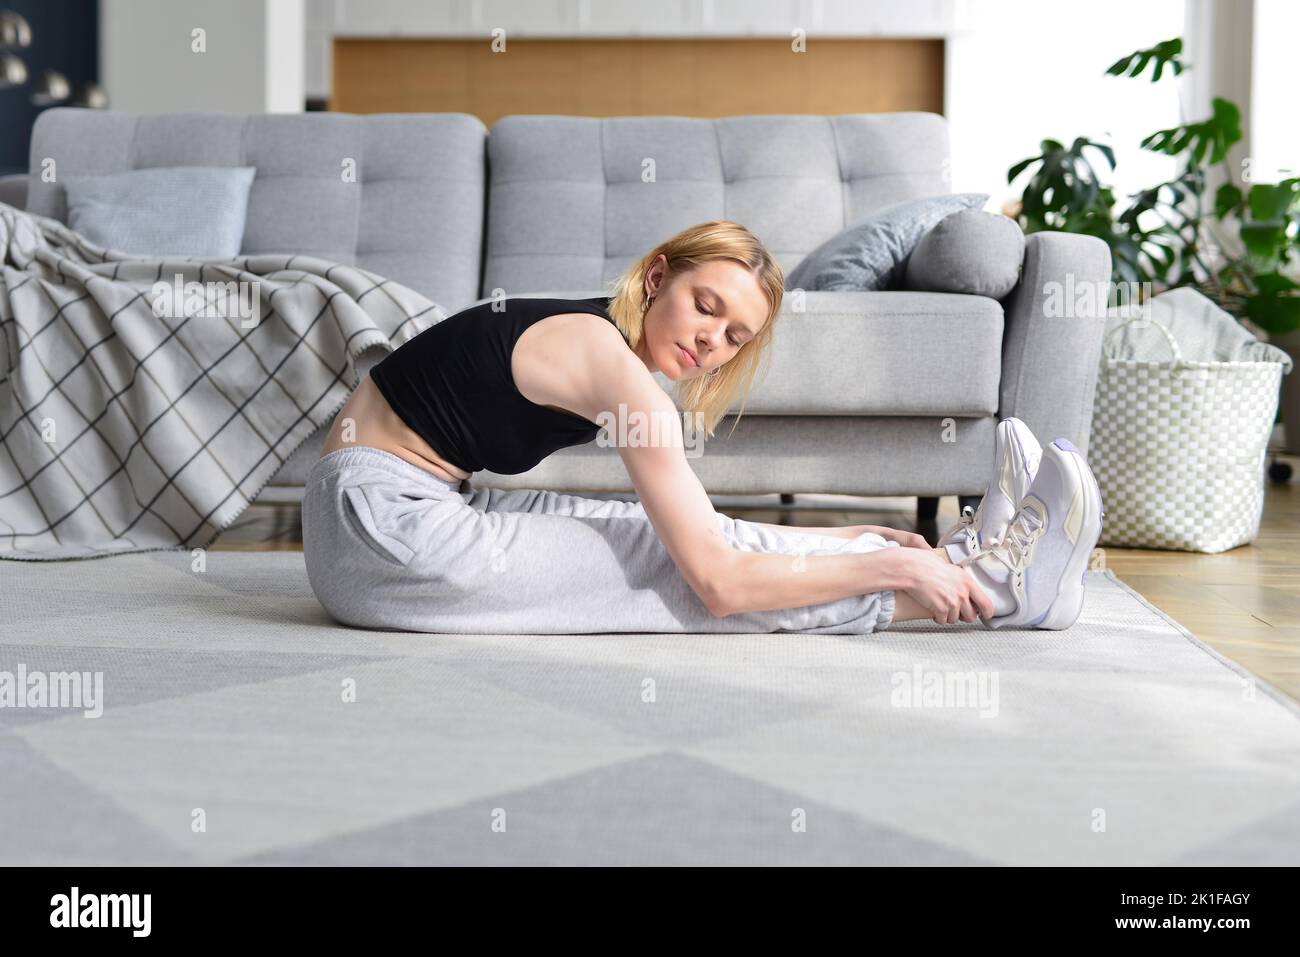 Woman doing stretching exercise at home Stock Photo